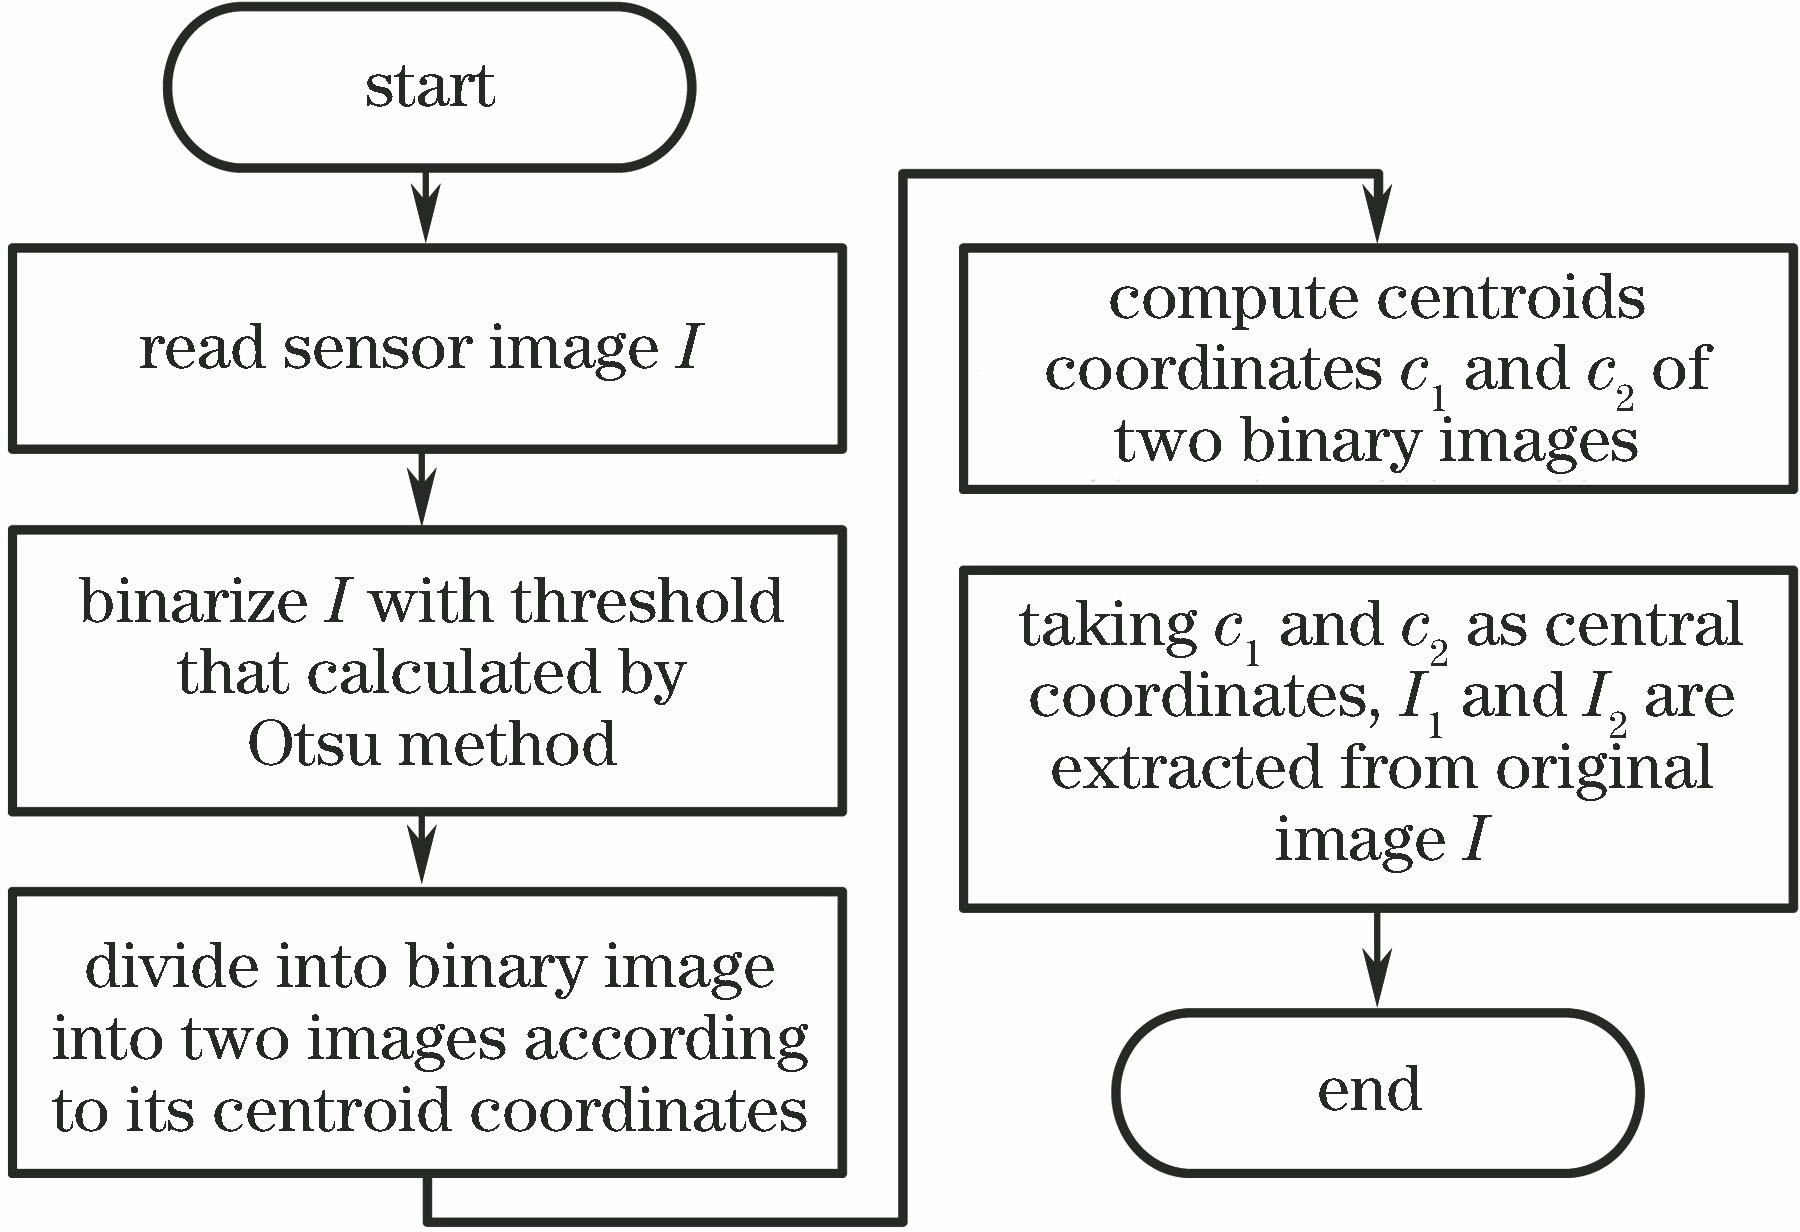 Flow chart of automatic spot location and extraction algorithm